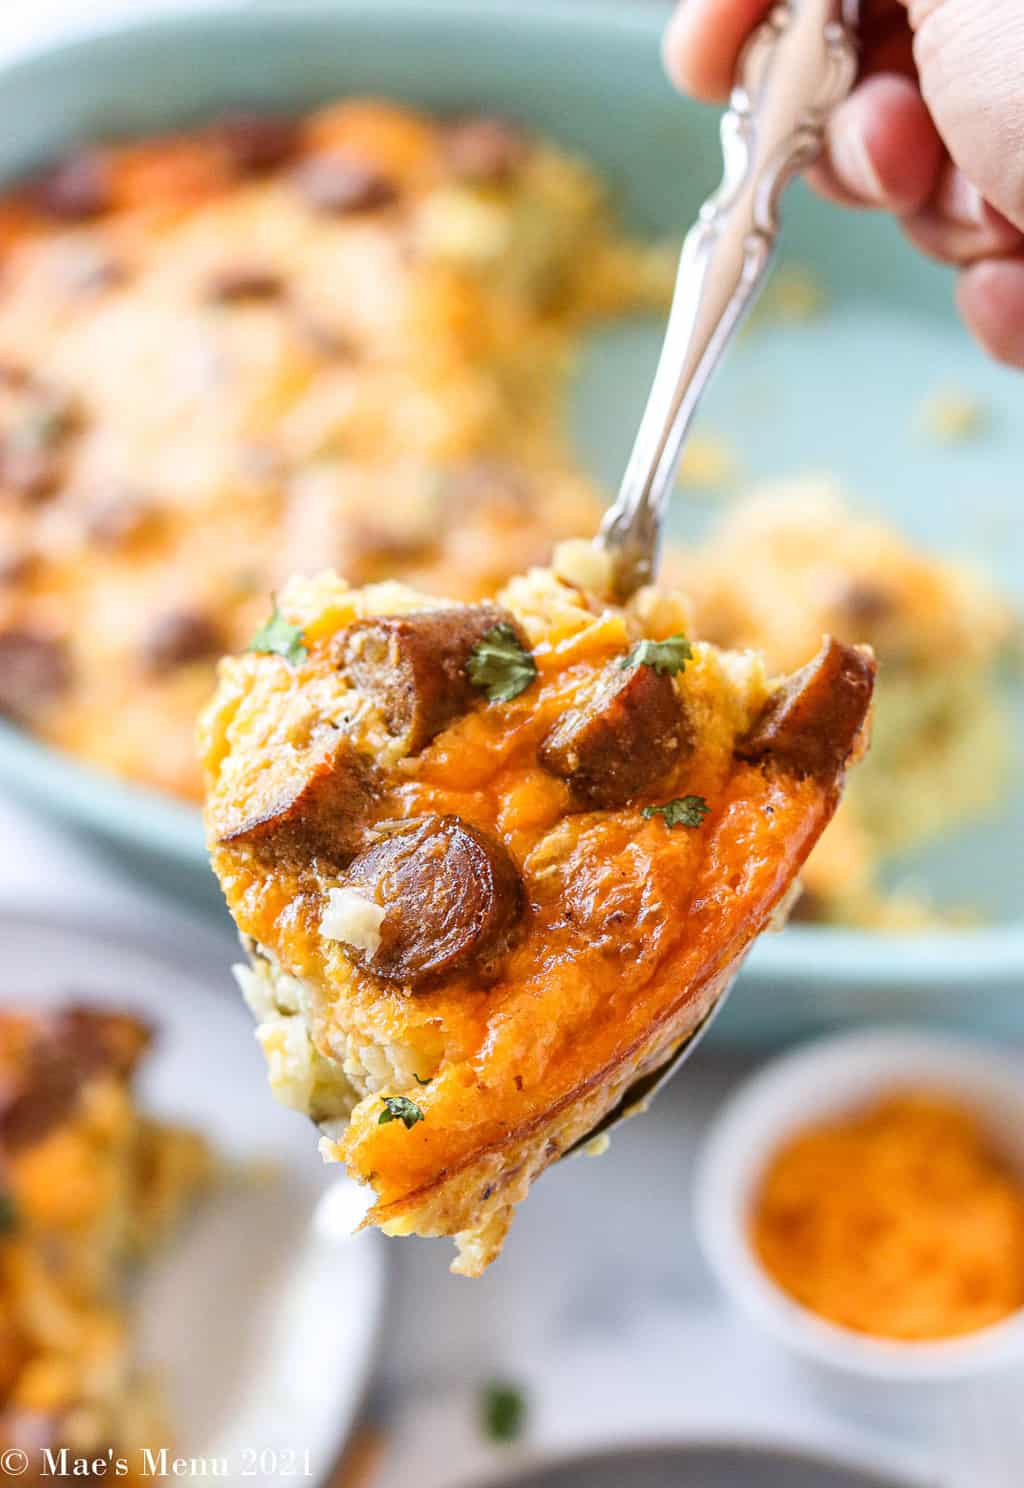 A large scoop of the breakfast tater tot casserole